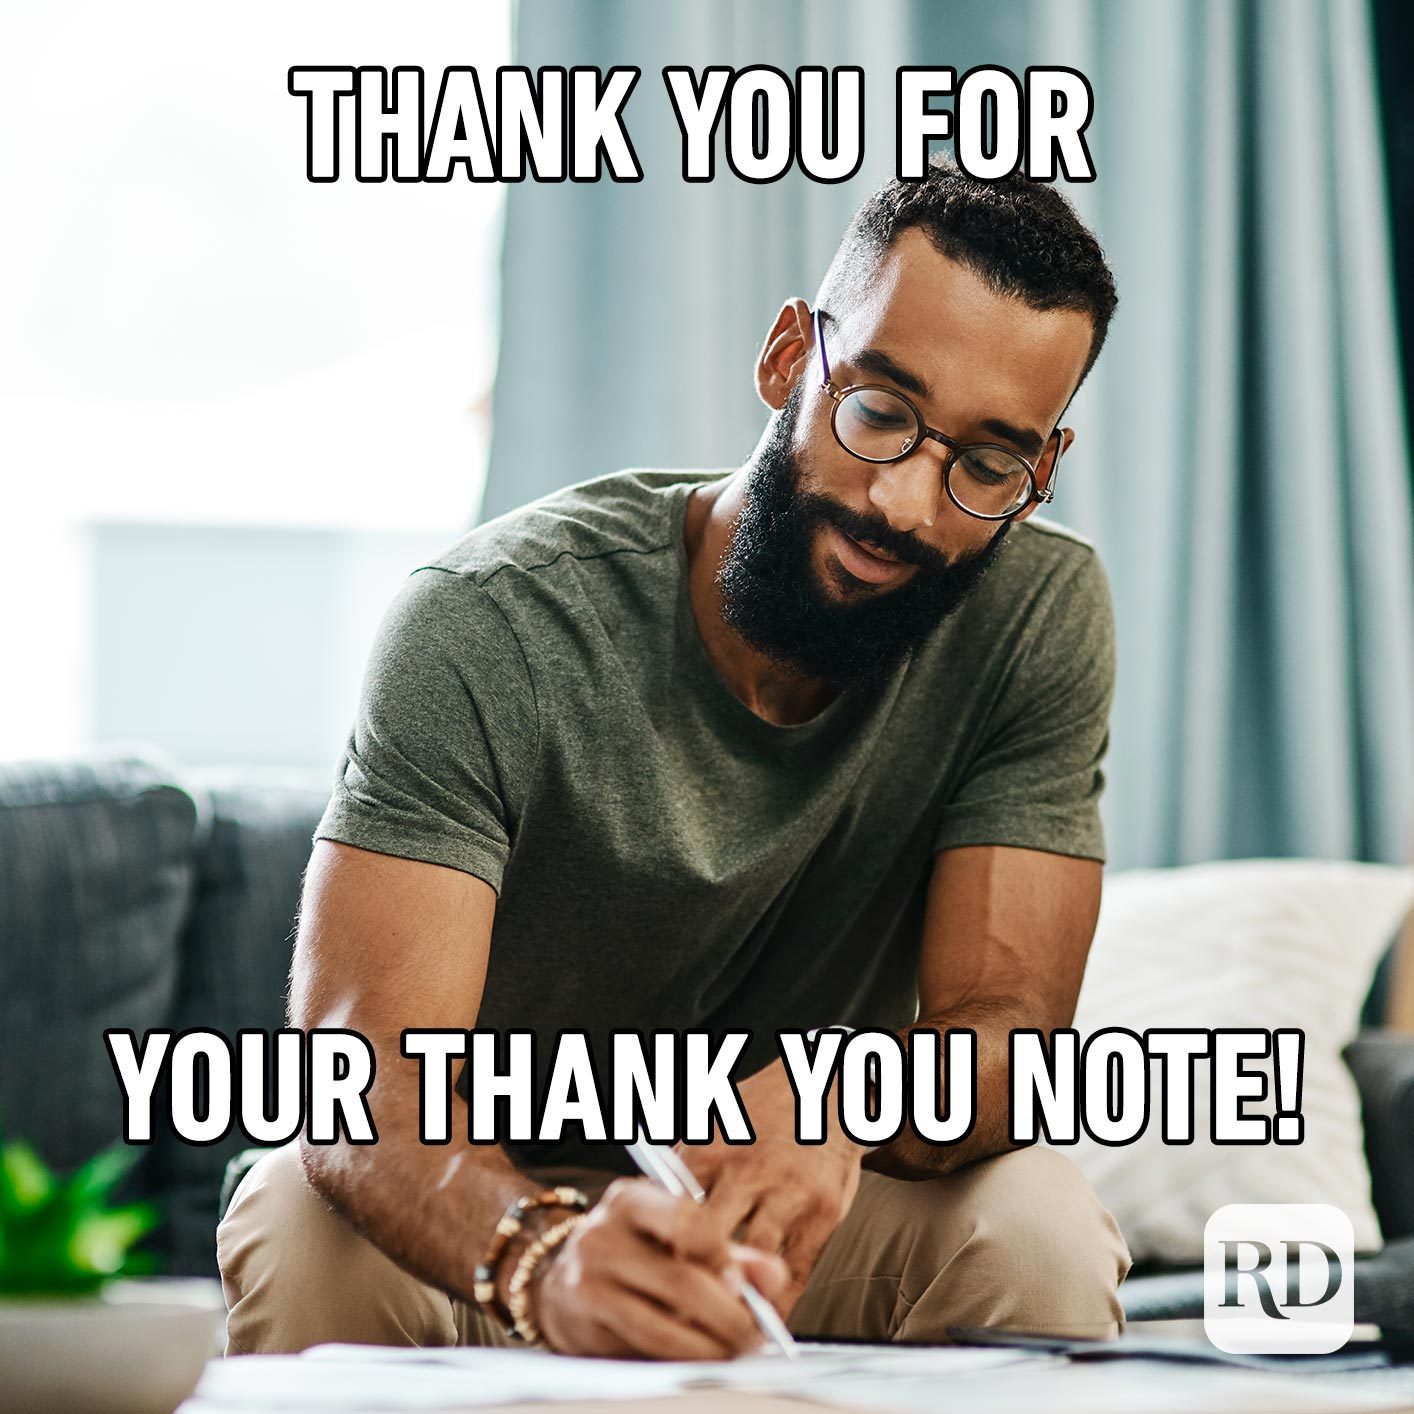 Man writing thank you note. Meme text: Thank you for your thank you note!